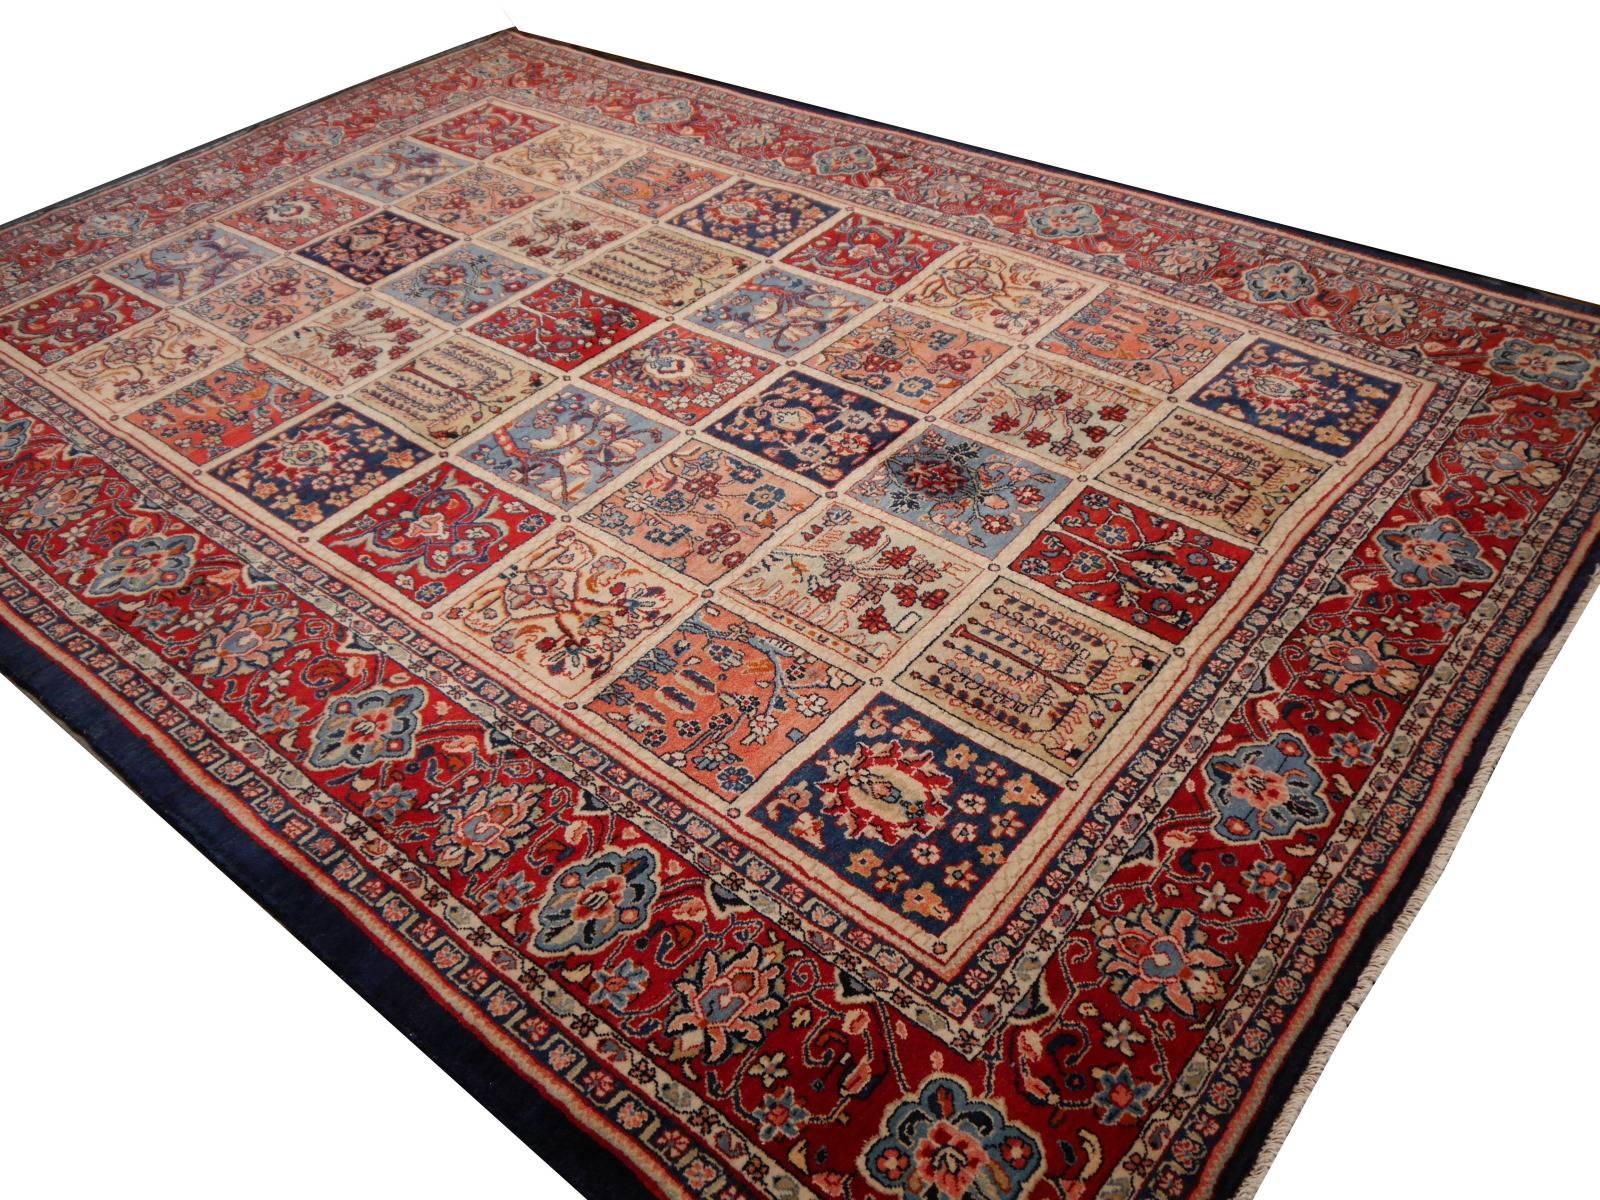 Beautiful Persian hand-knotted vintage rug. Only best highland wool was used to make this impressive handmade carpet. Full pile condition and dense weave combined with the traditional 